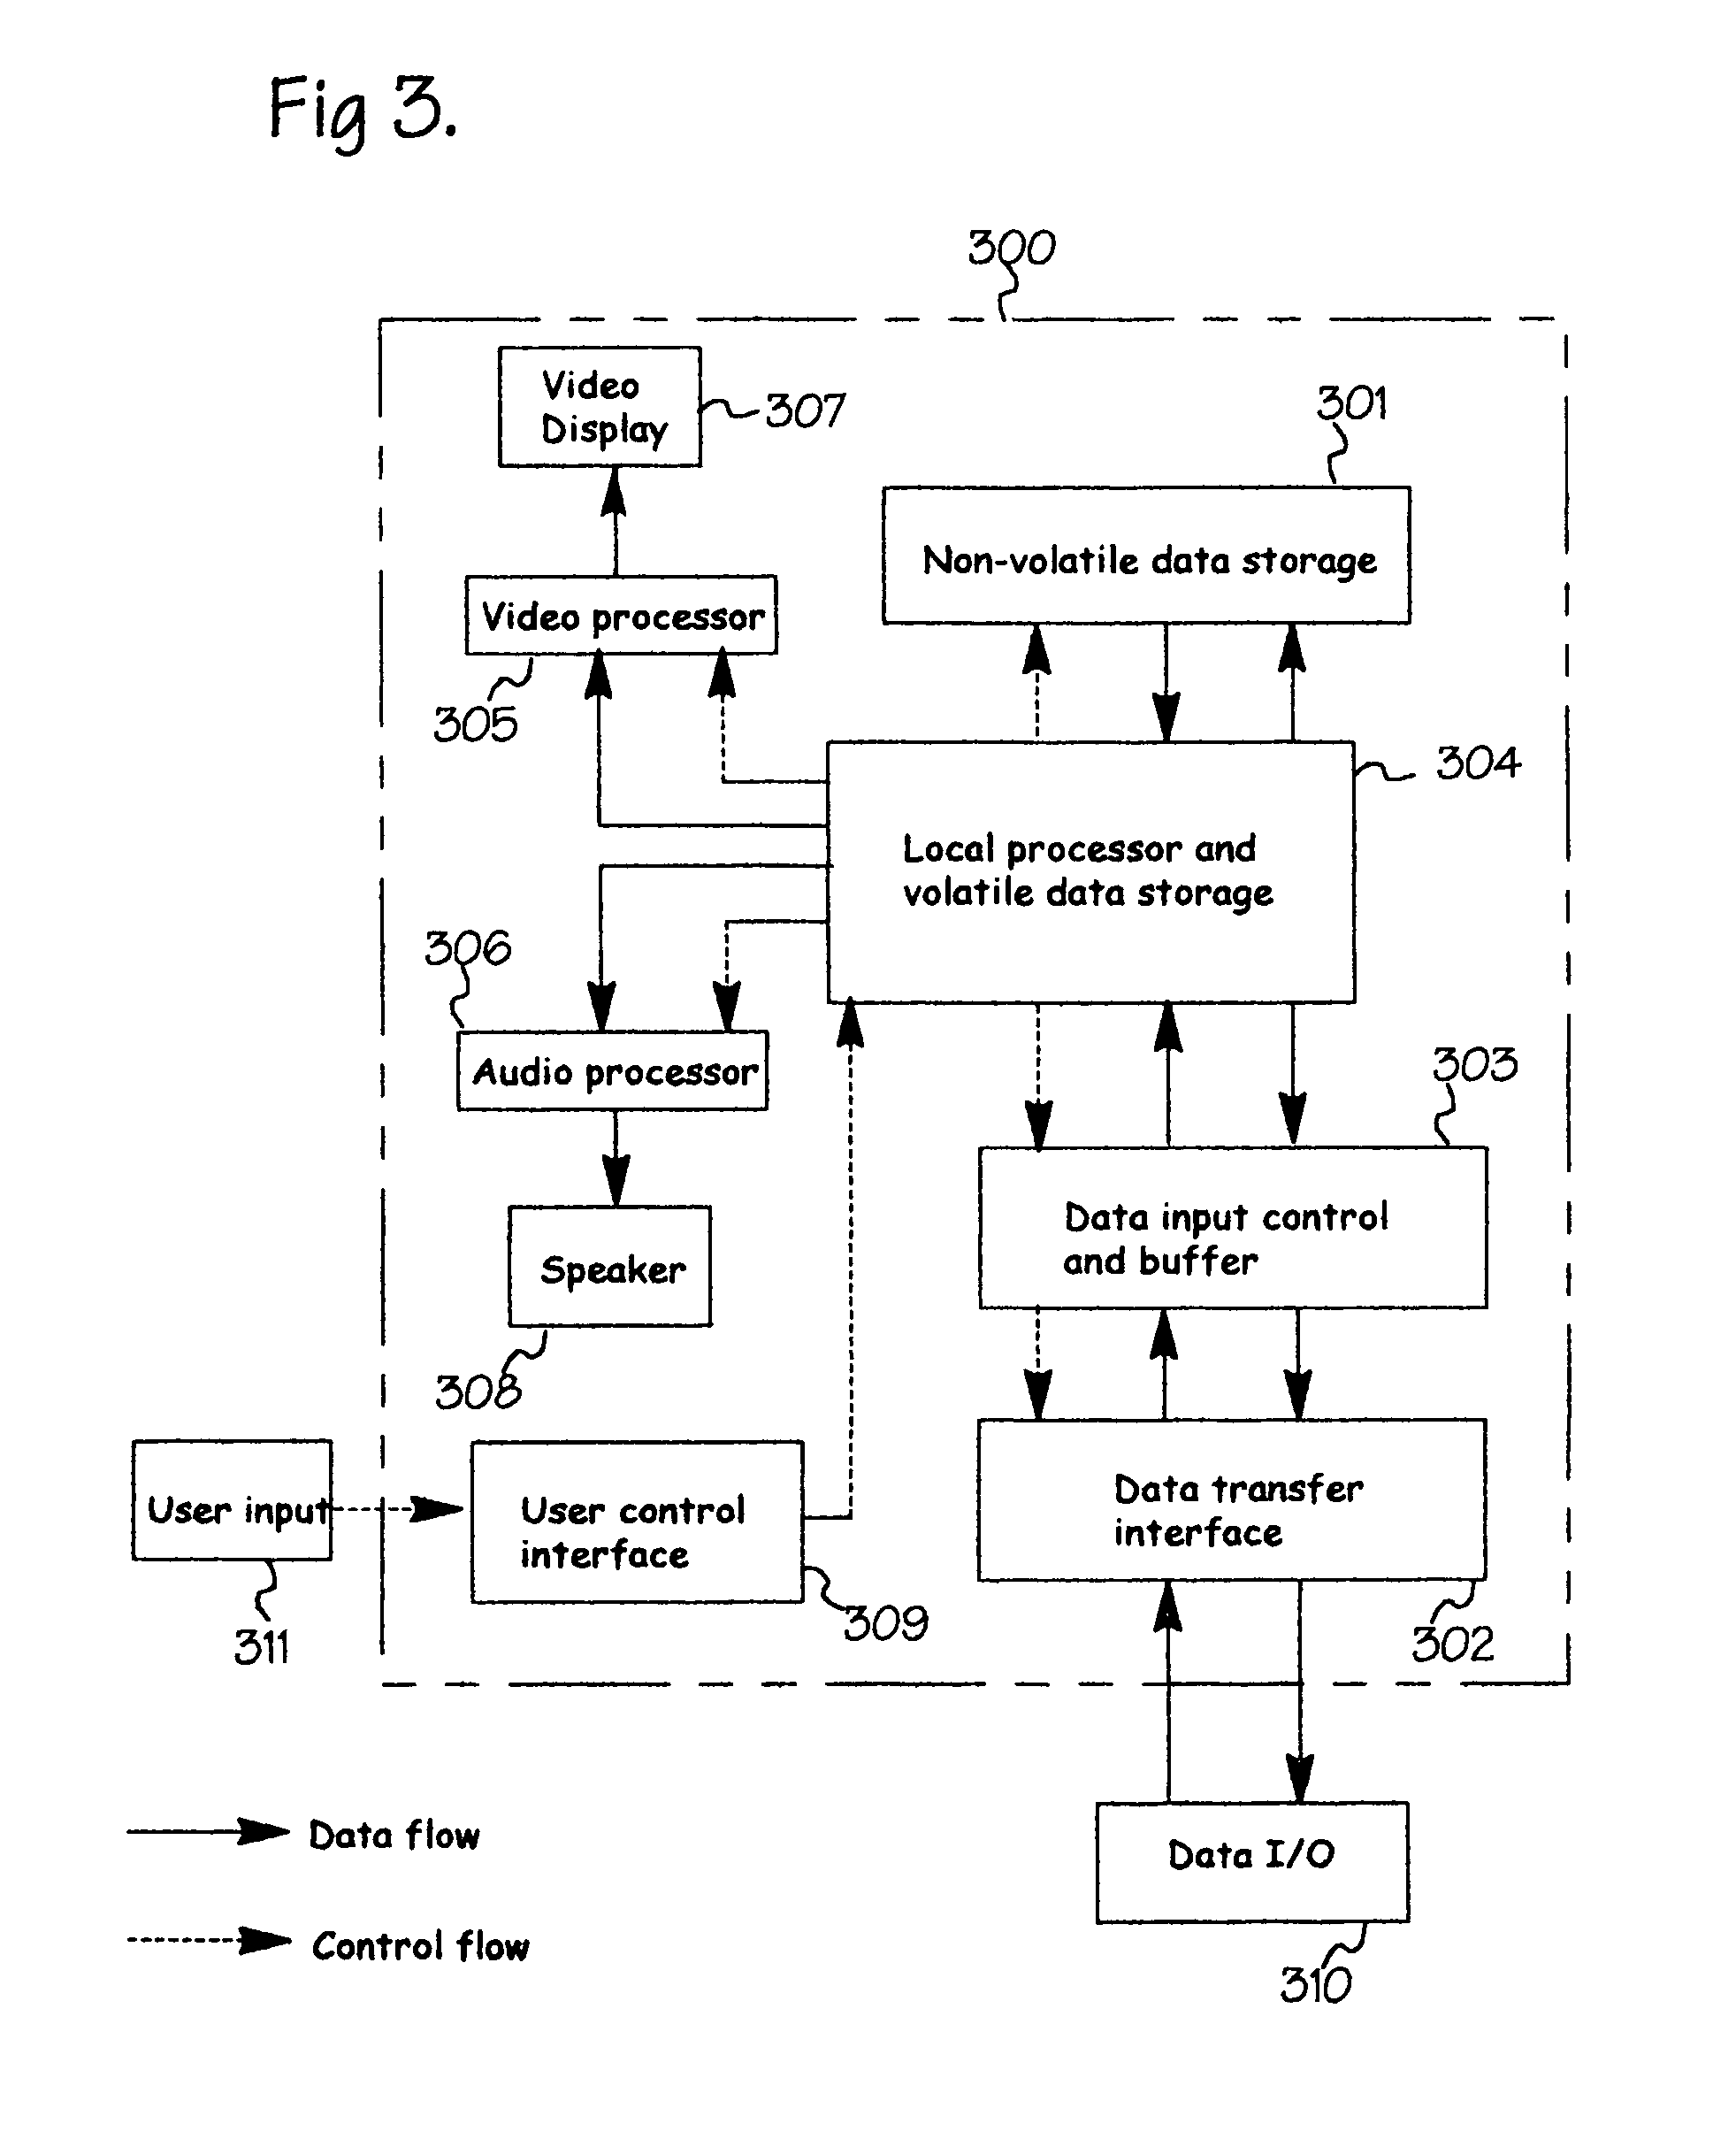 Exercise routine display system and method